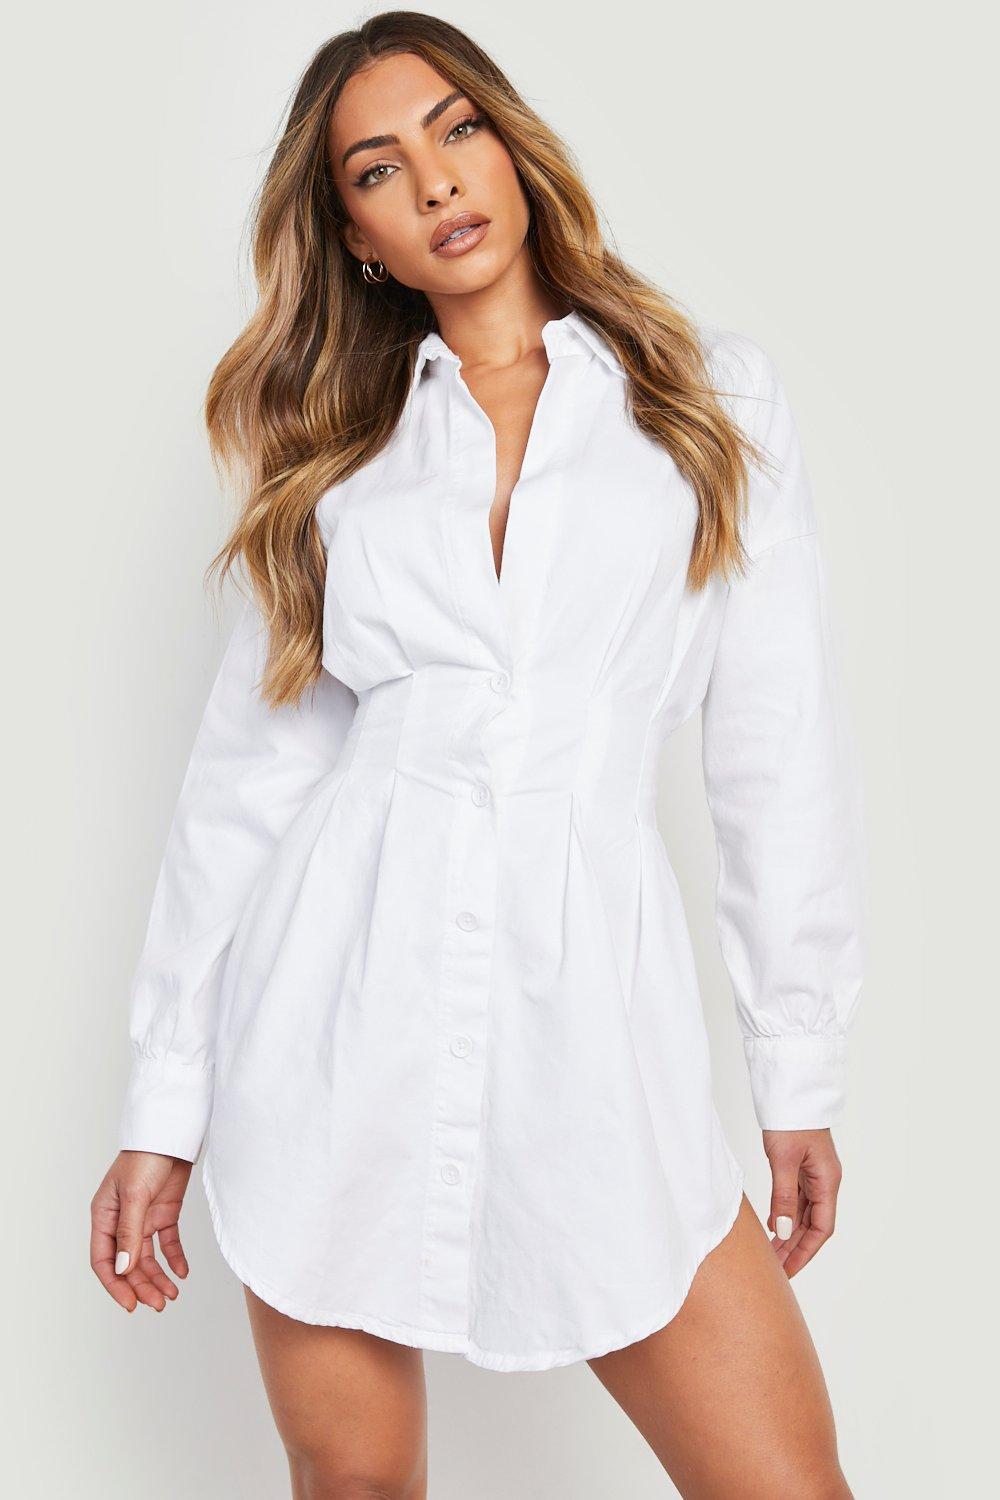 Pocket Dress In Brilliant White | 7 For All Mankind